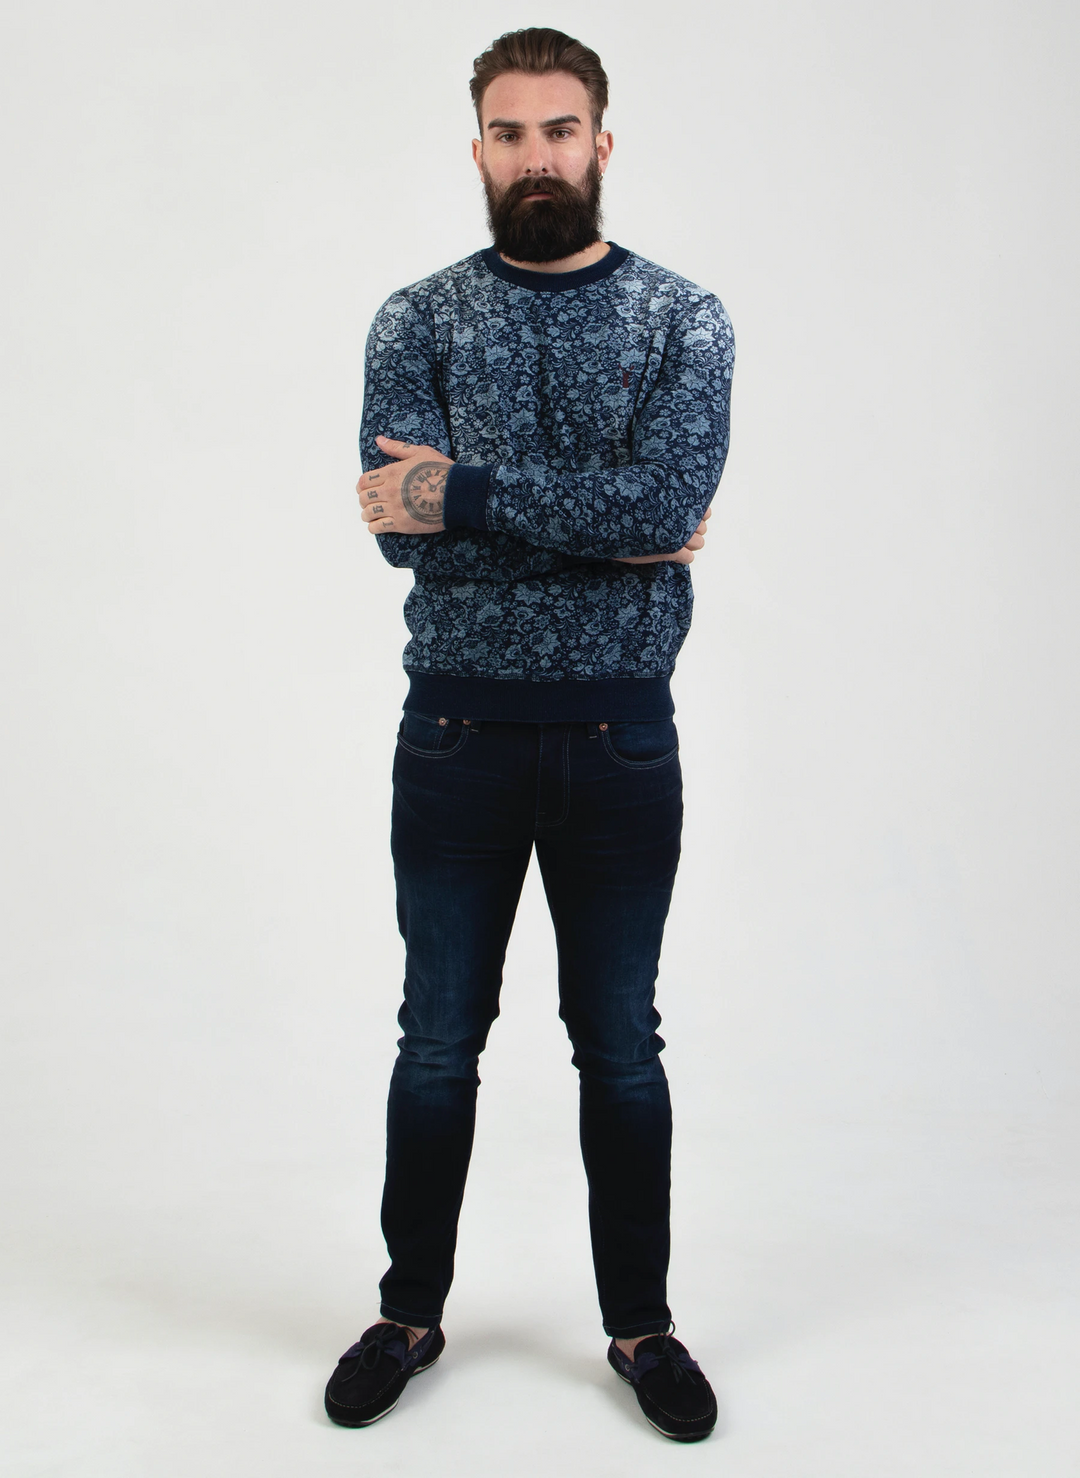 Pearly King Sceptre Crewneck Sweater in Indigo | Buster McGee Daylesford